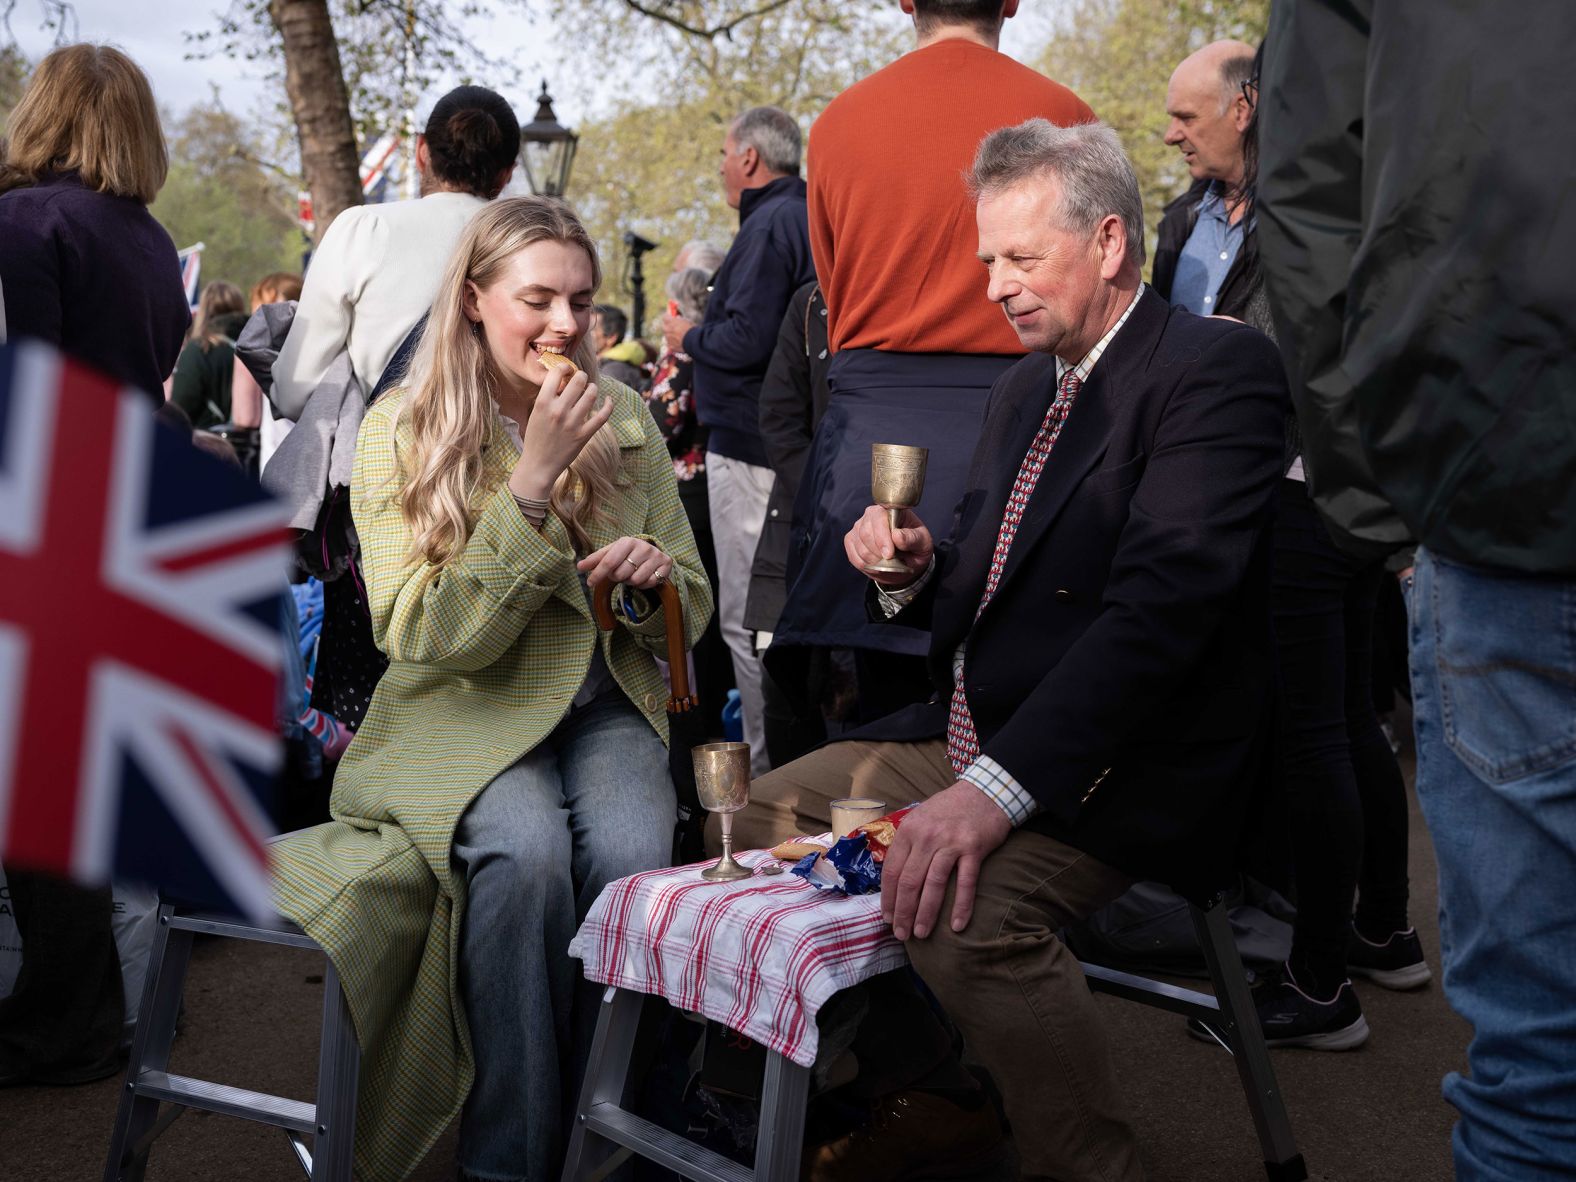 Mary Wells and Malcom Thorn enjoy tea and biscuits on the Mall while waiting to see the King. "It's the perfect breakfast," Thorn said.